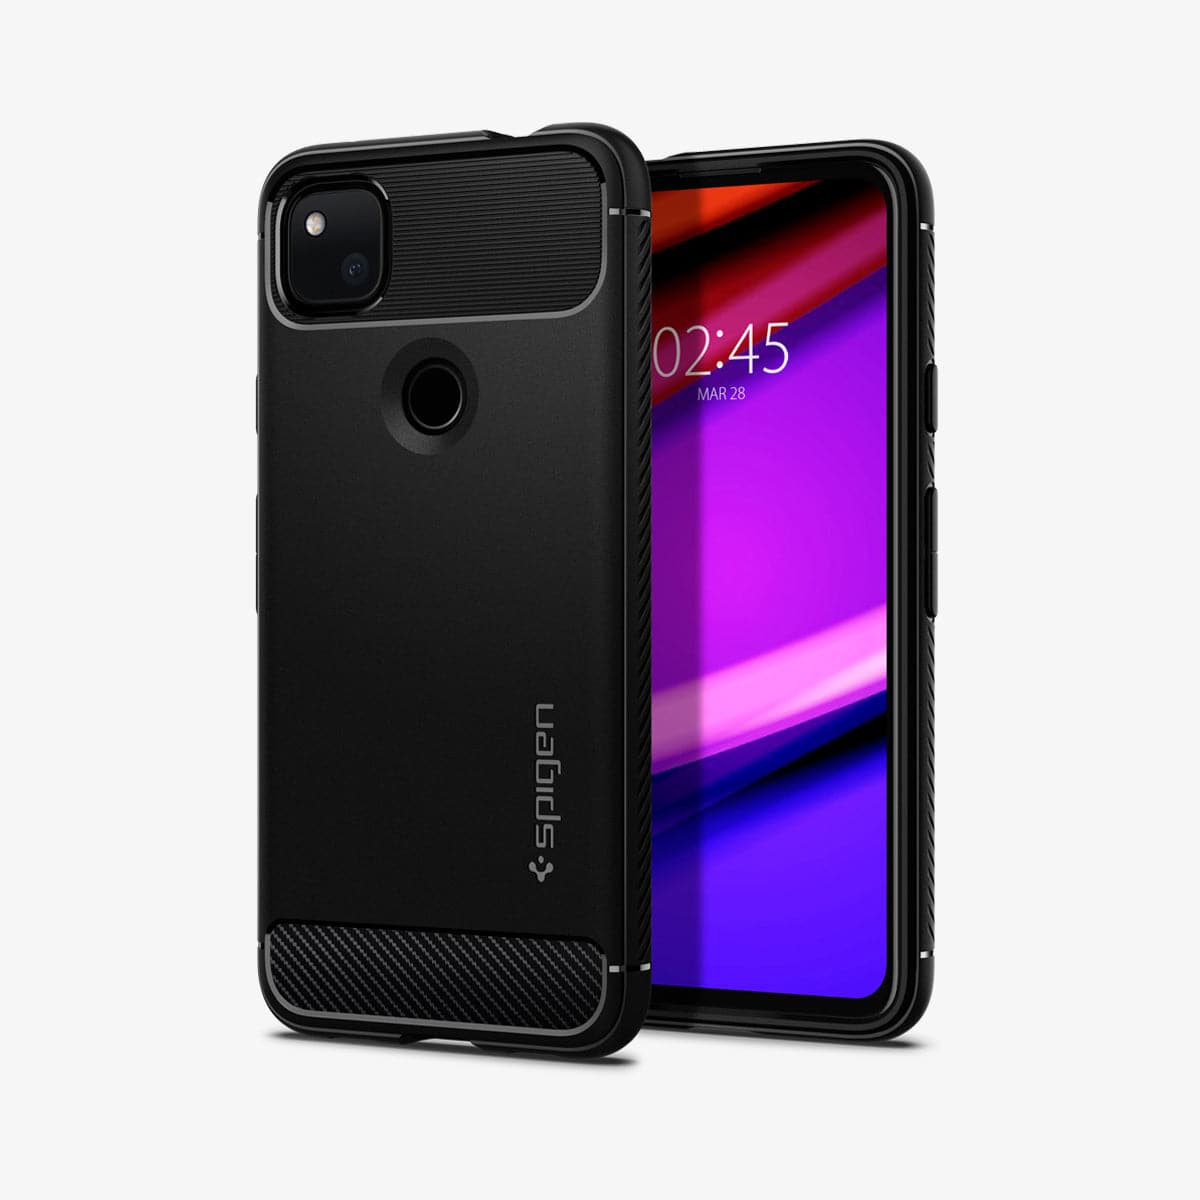 ACS01015 - Pixel 4a Case Rugged Armor in matte black showing the back and front